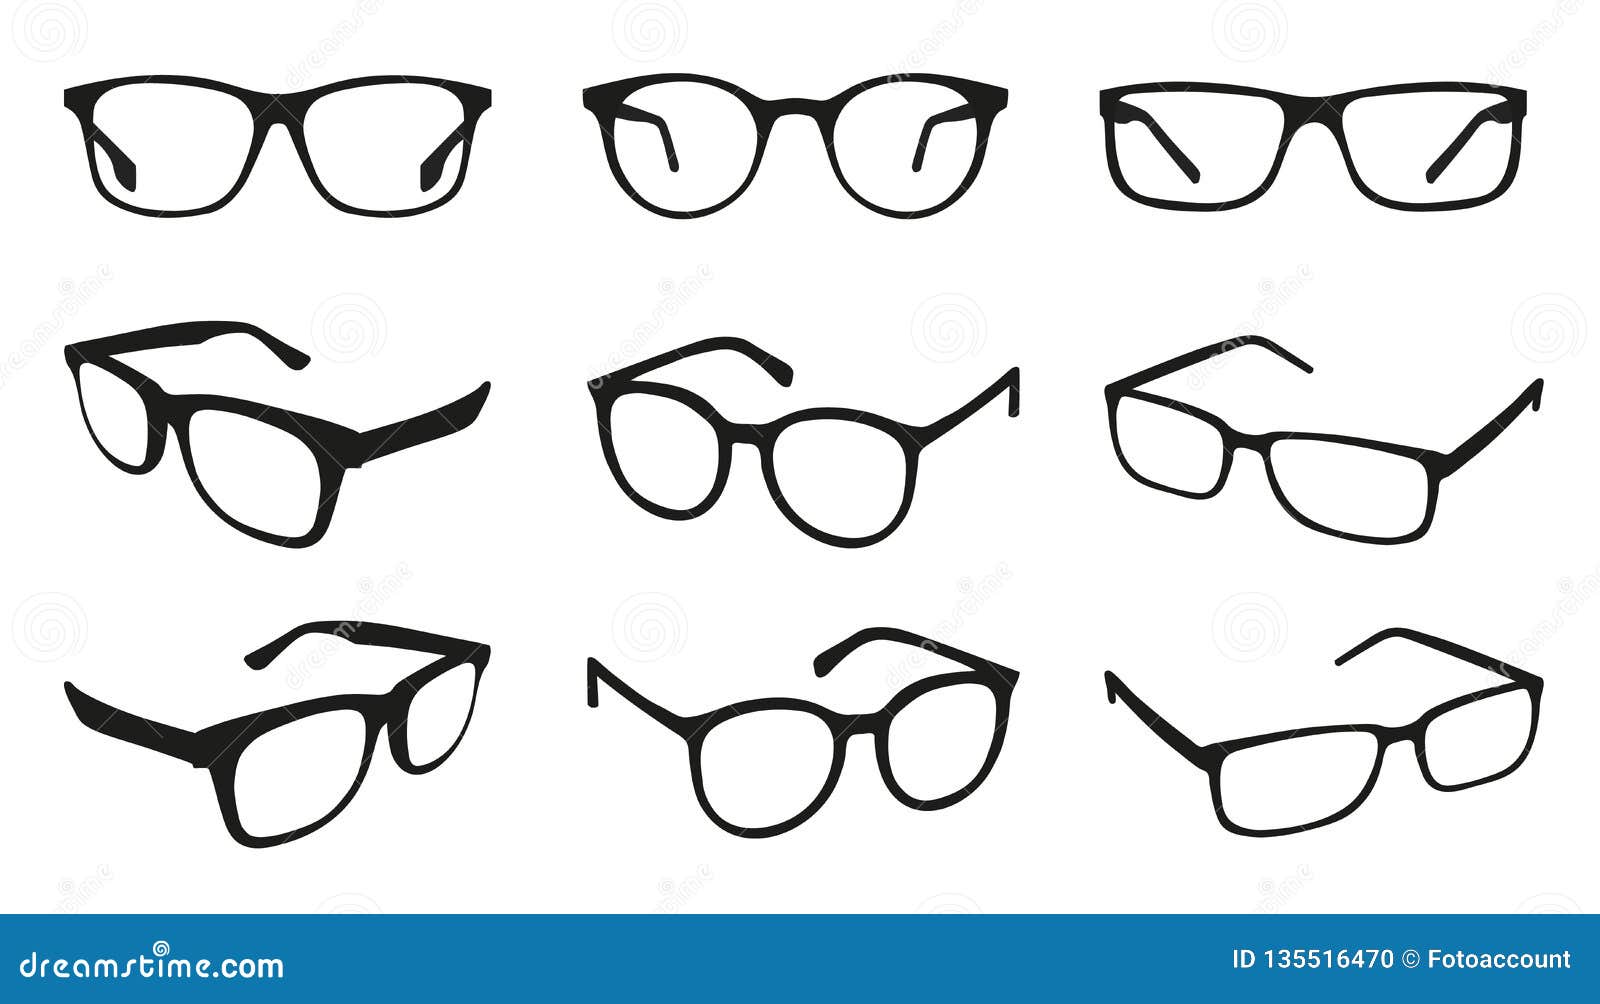 glasses icons - different angle view - black   set -  on white background